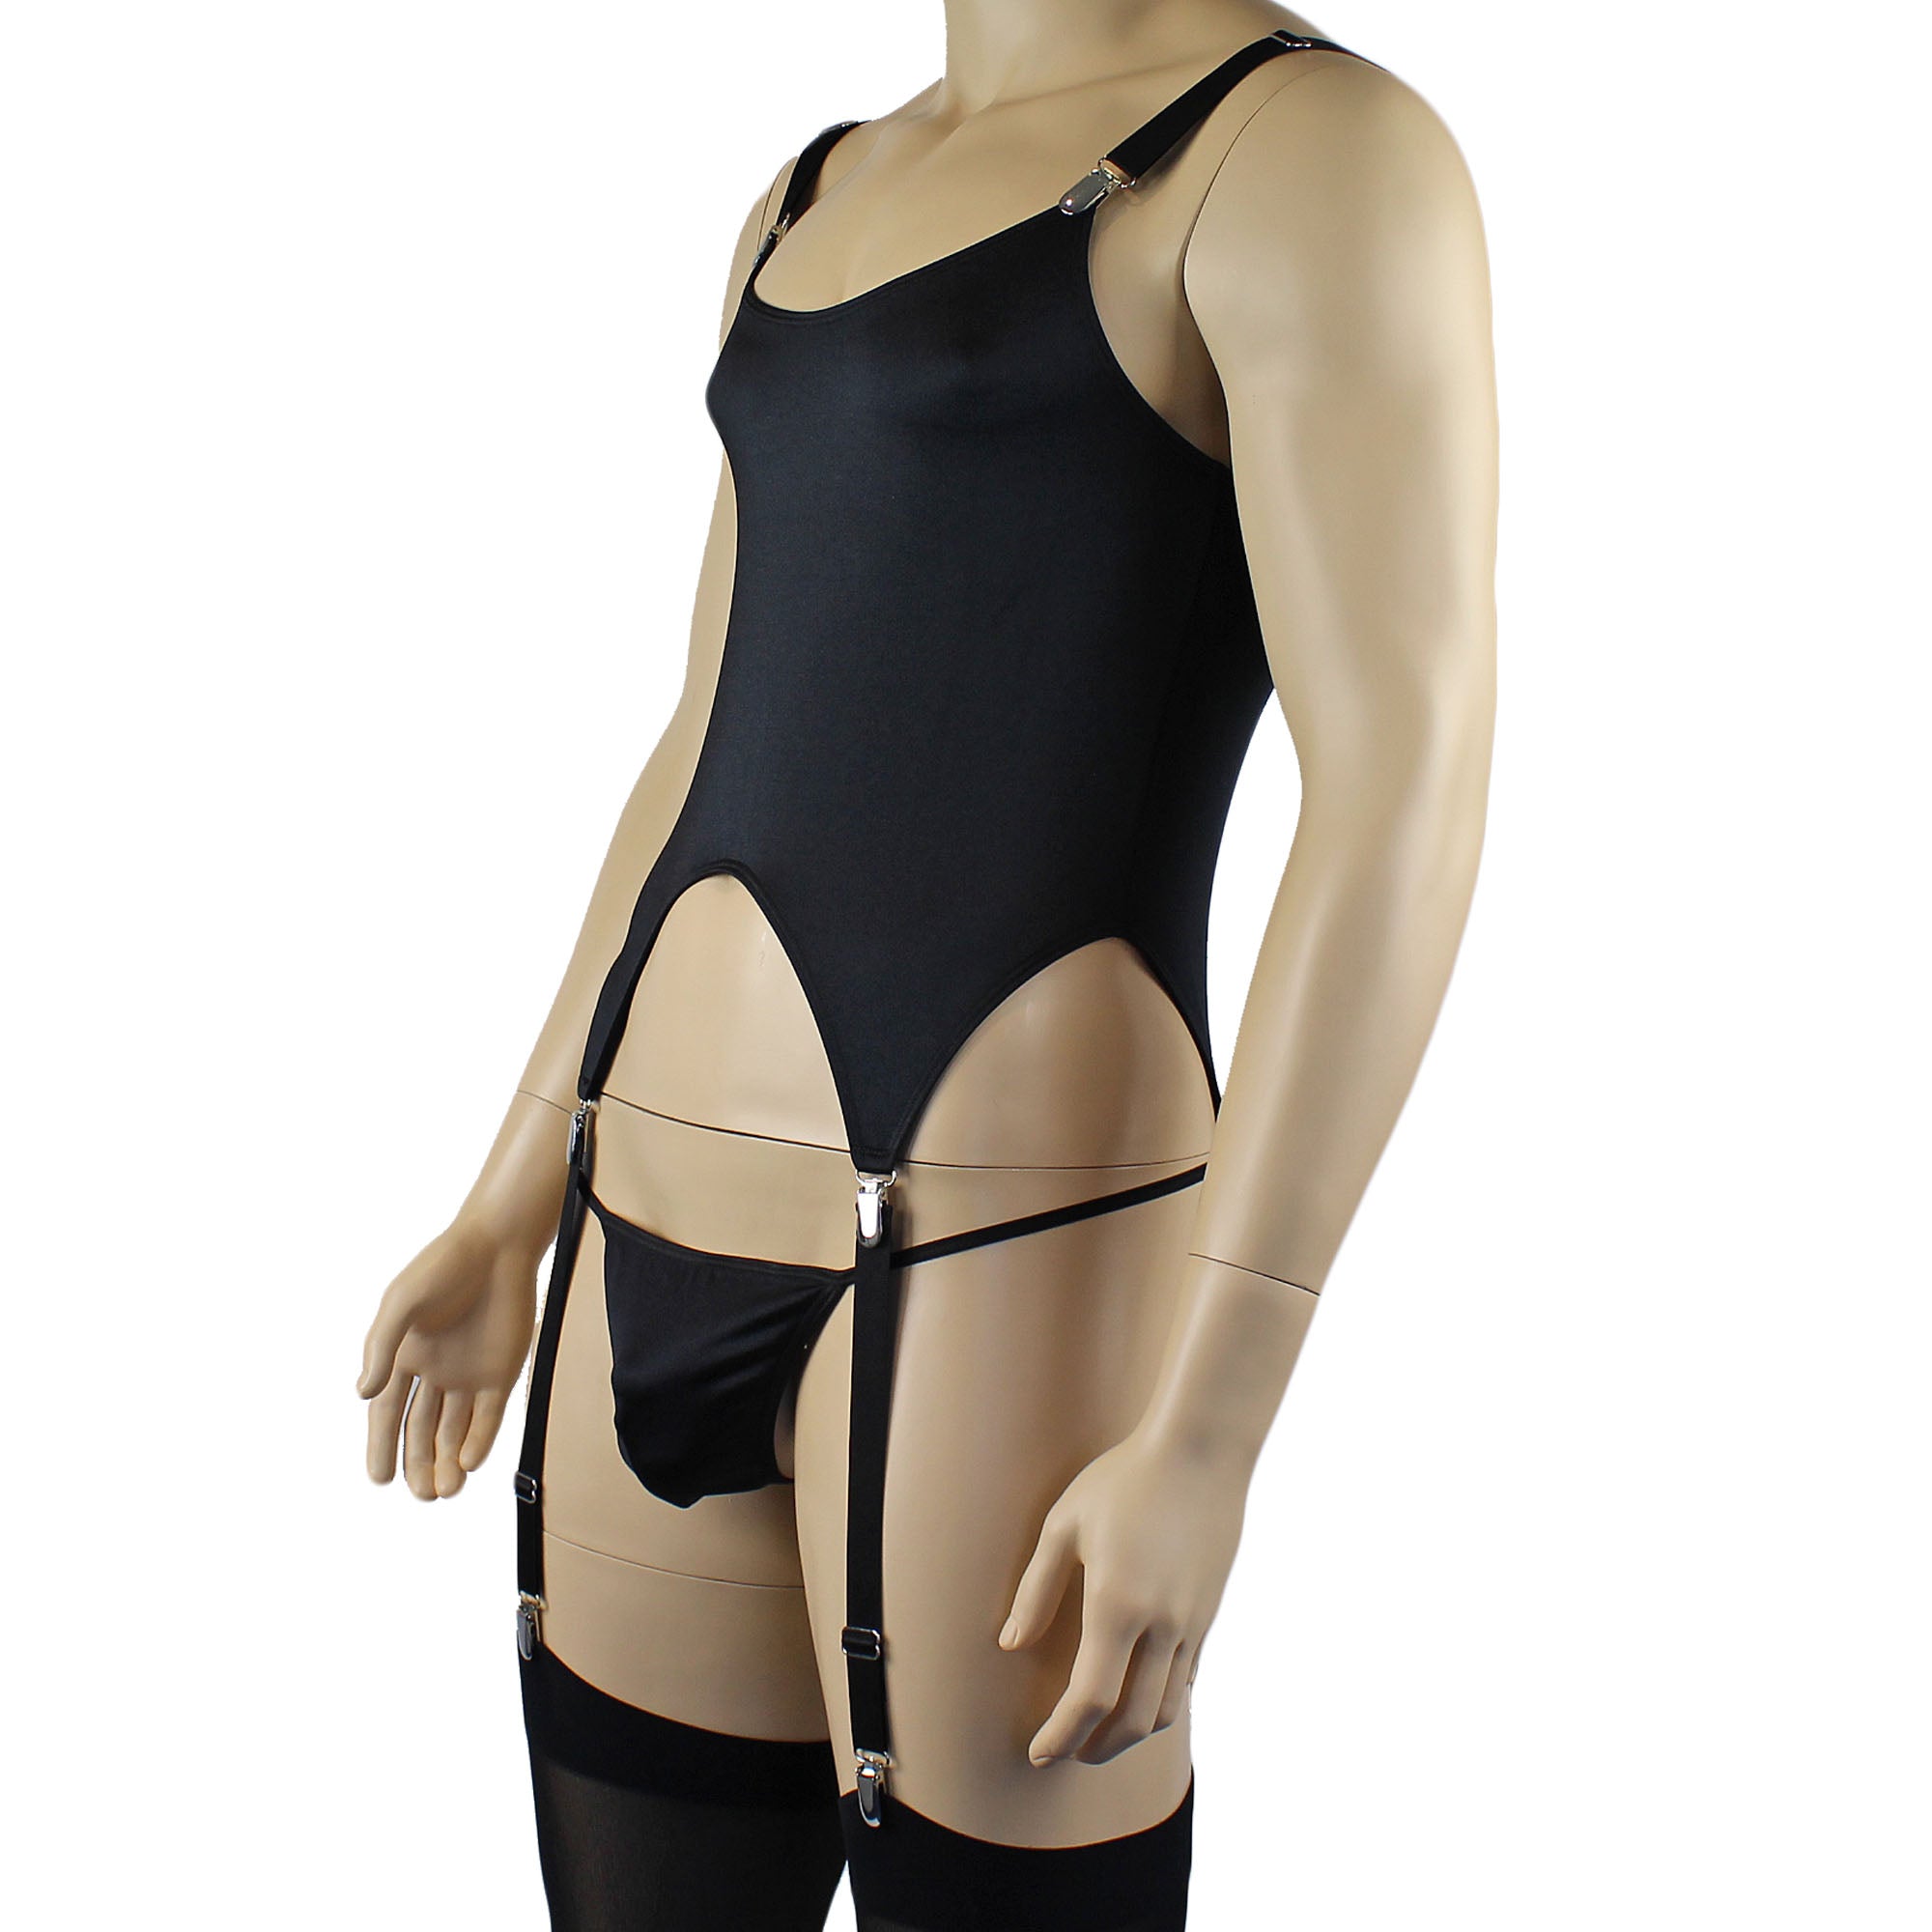 Mens Janice Corset Top with Metal Clips & Attached Garters - Sizes up to 3XL